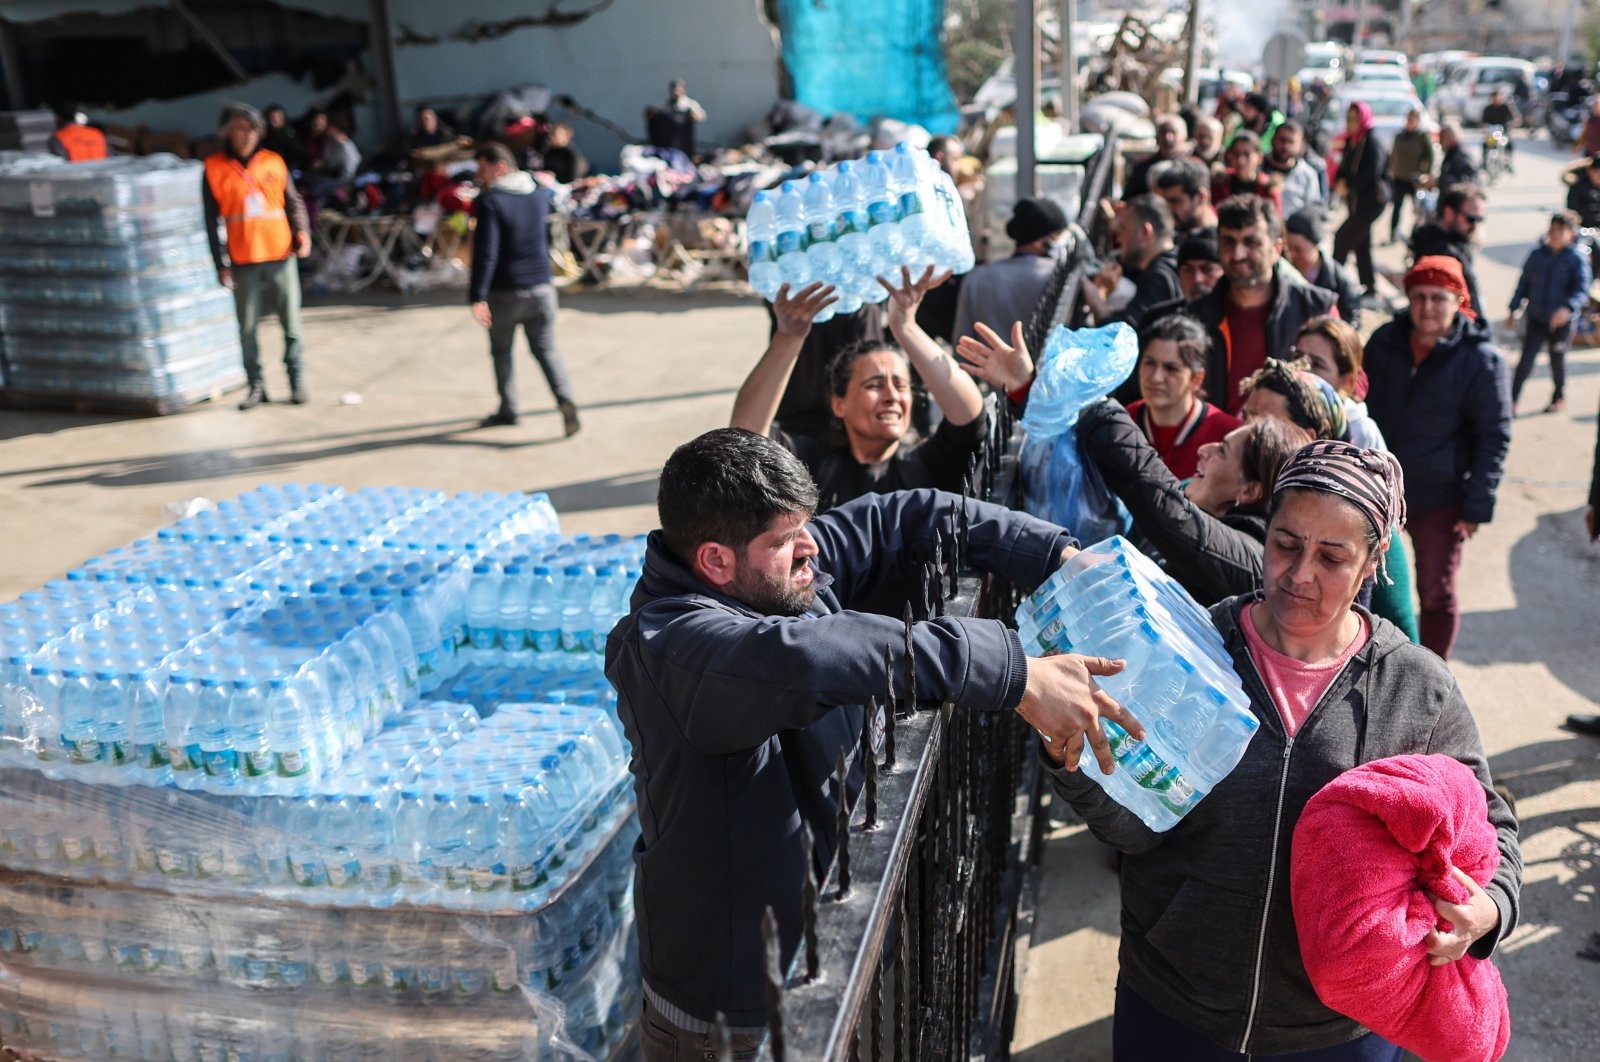 People receive crates of water in the aftermath of powerful earthquakes in the Samandağ district of Hatay, Türkiye, Feb. 23, 2023. (EPA Photo)